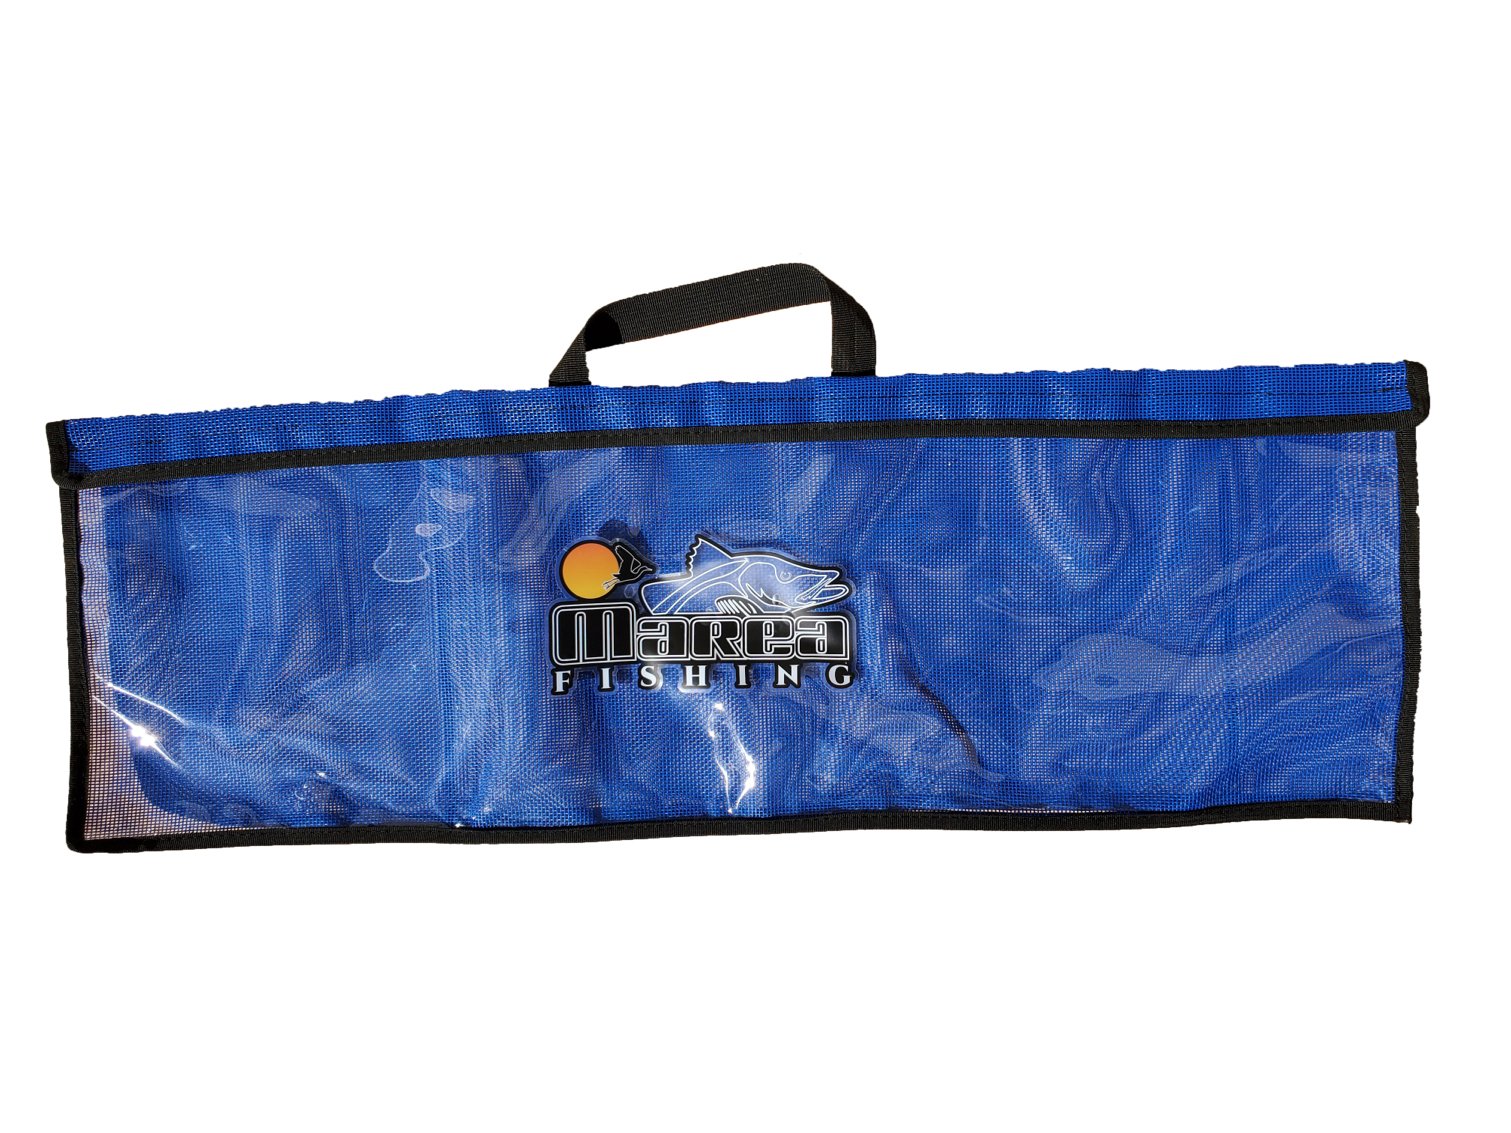 Breathable Mesh Bag for Dredges or Offshore Lures